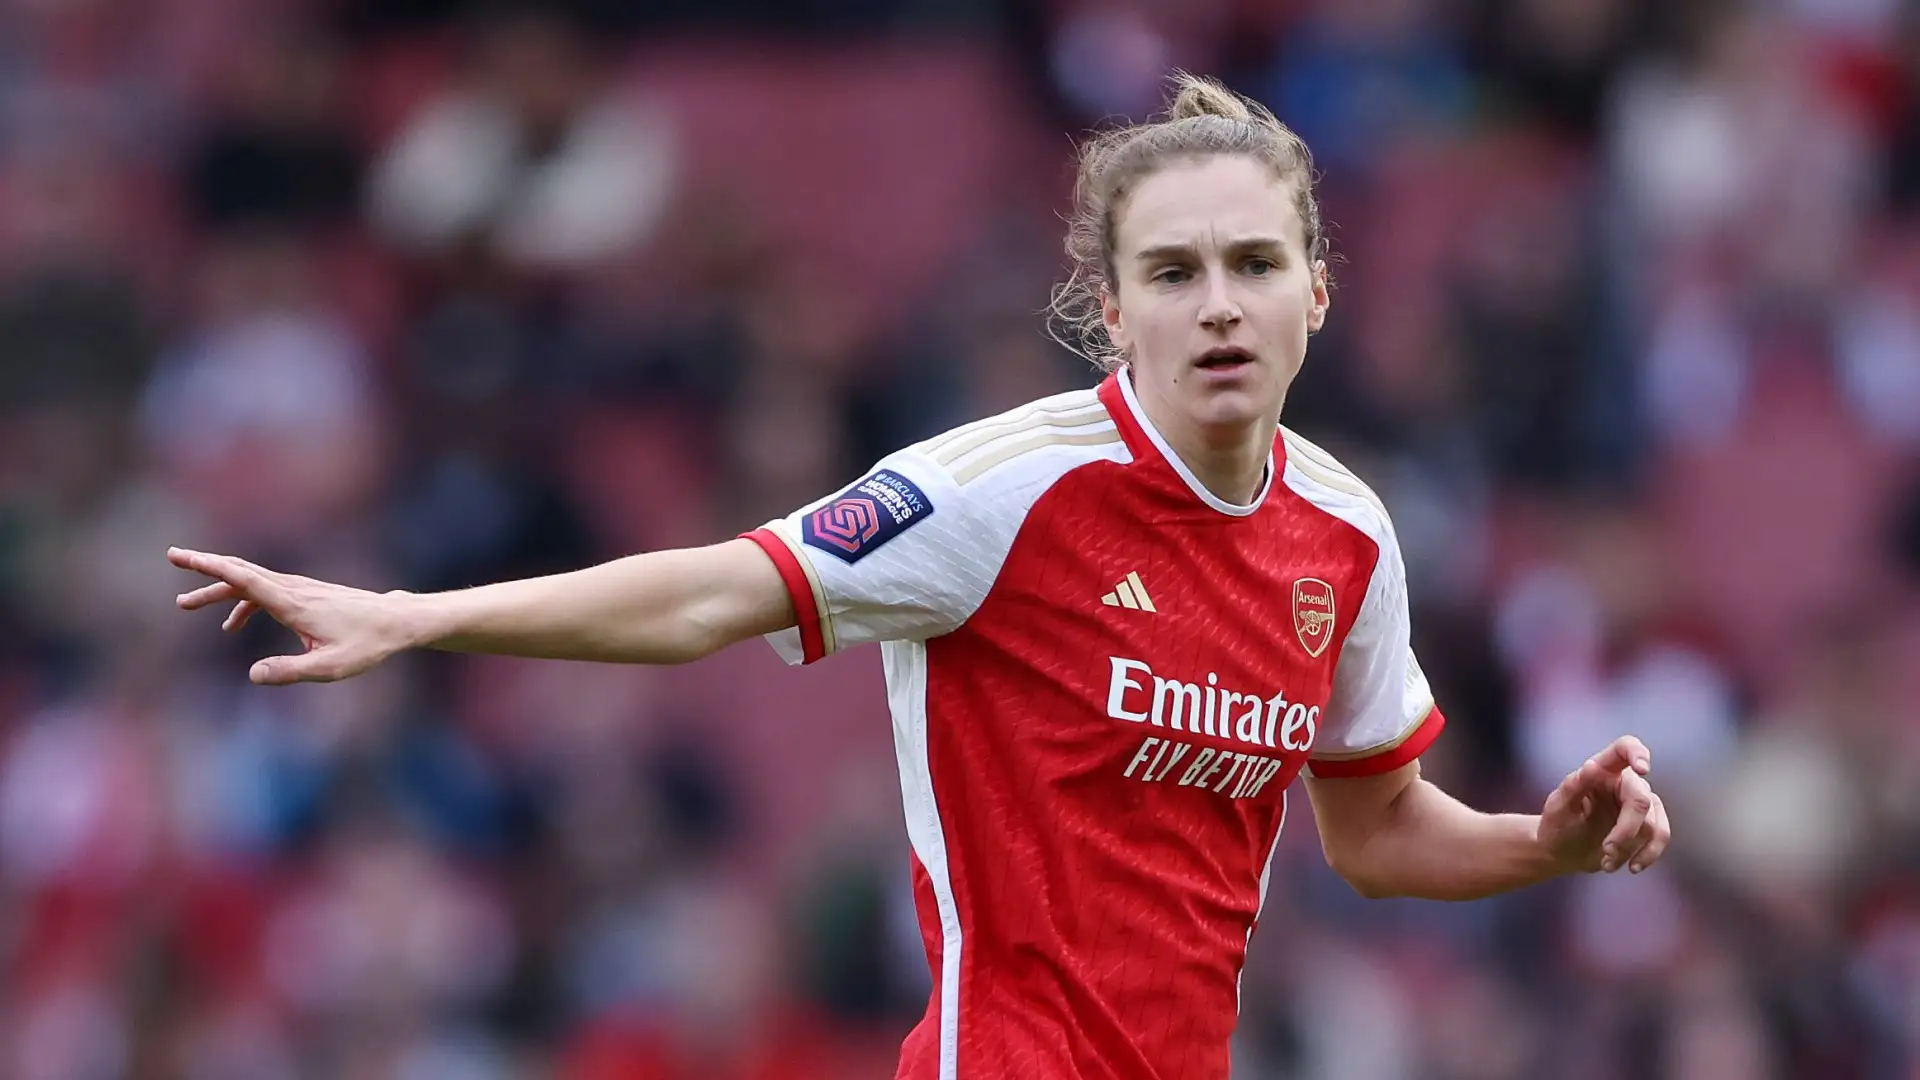 Vivianne Miedema is LEAVING Arsenal! Gunners reveal fan-favourite 125-goal forward will depart in the summer in bombshell announcement